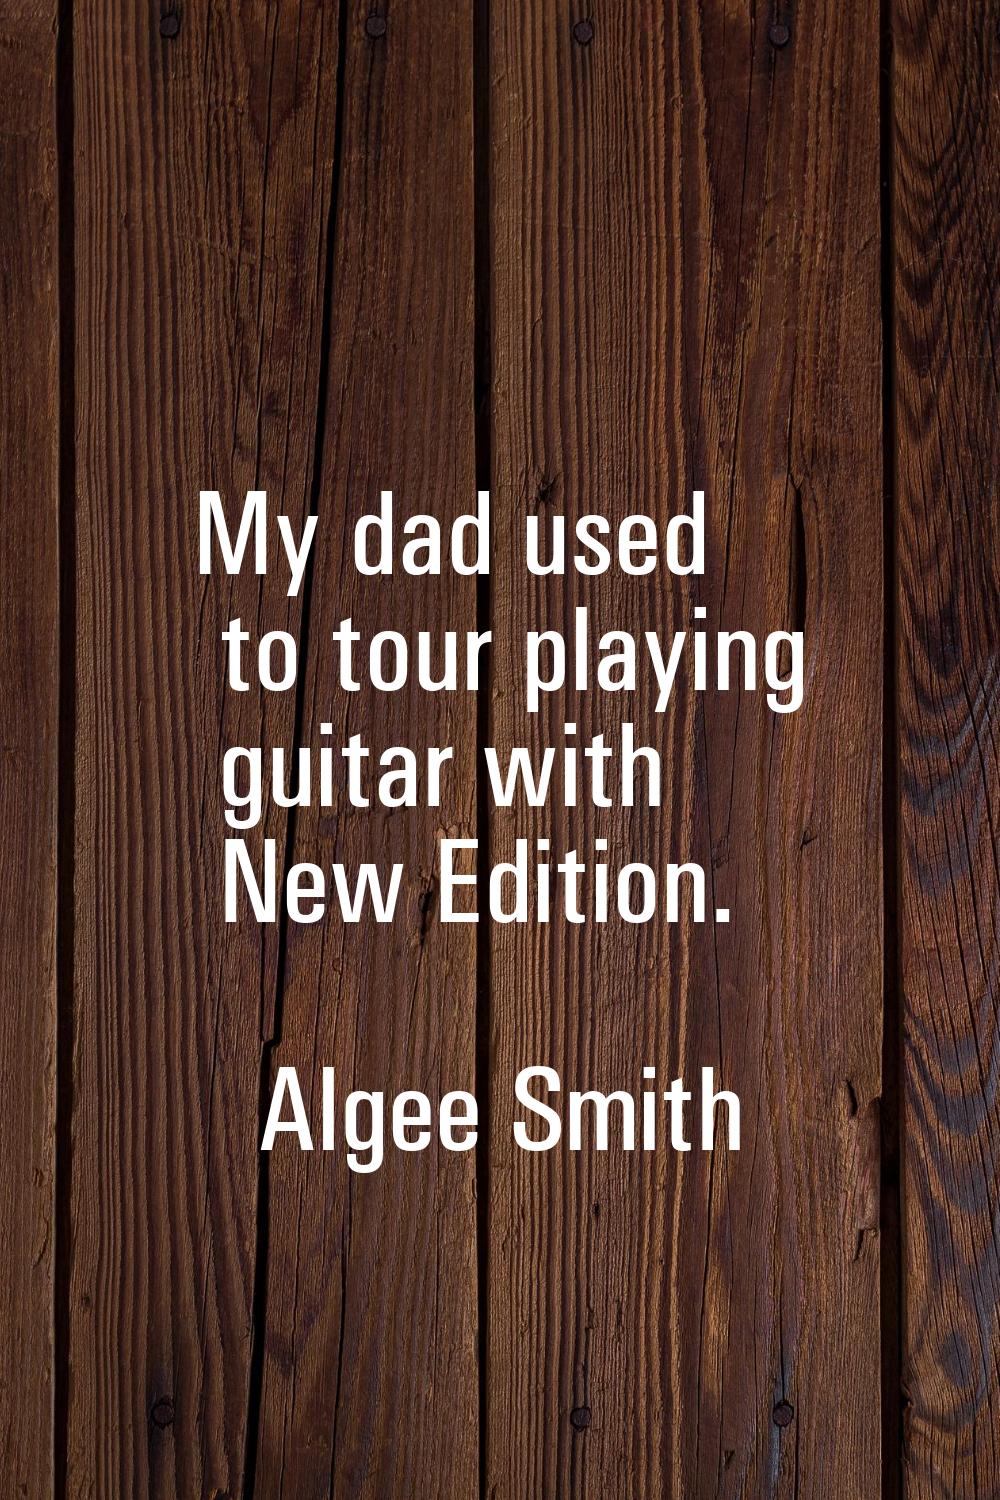 My dad used to tour playing guitar with New Edition.